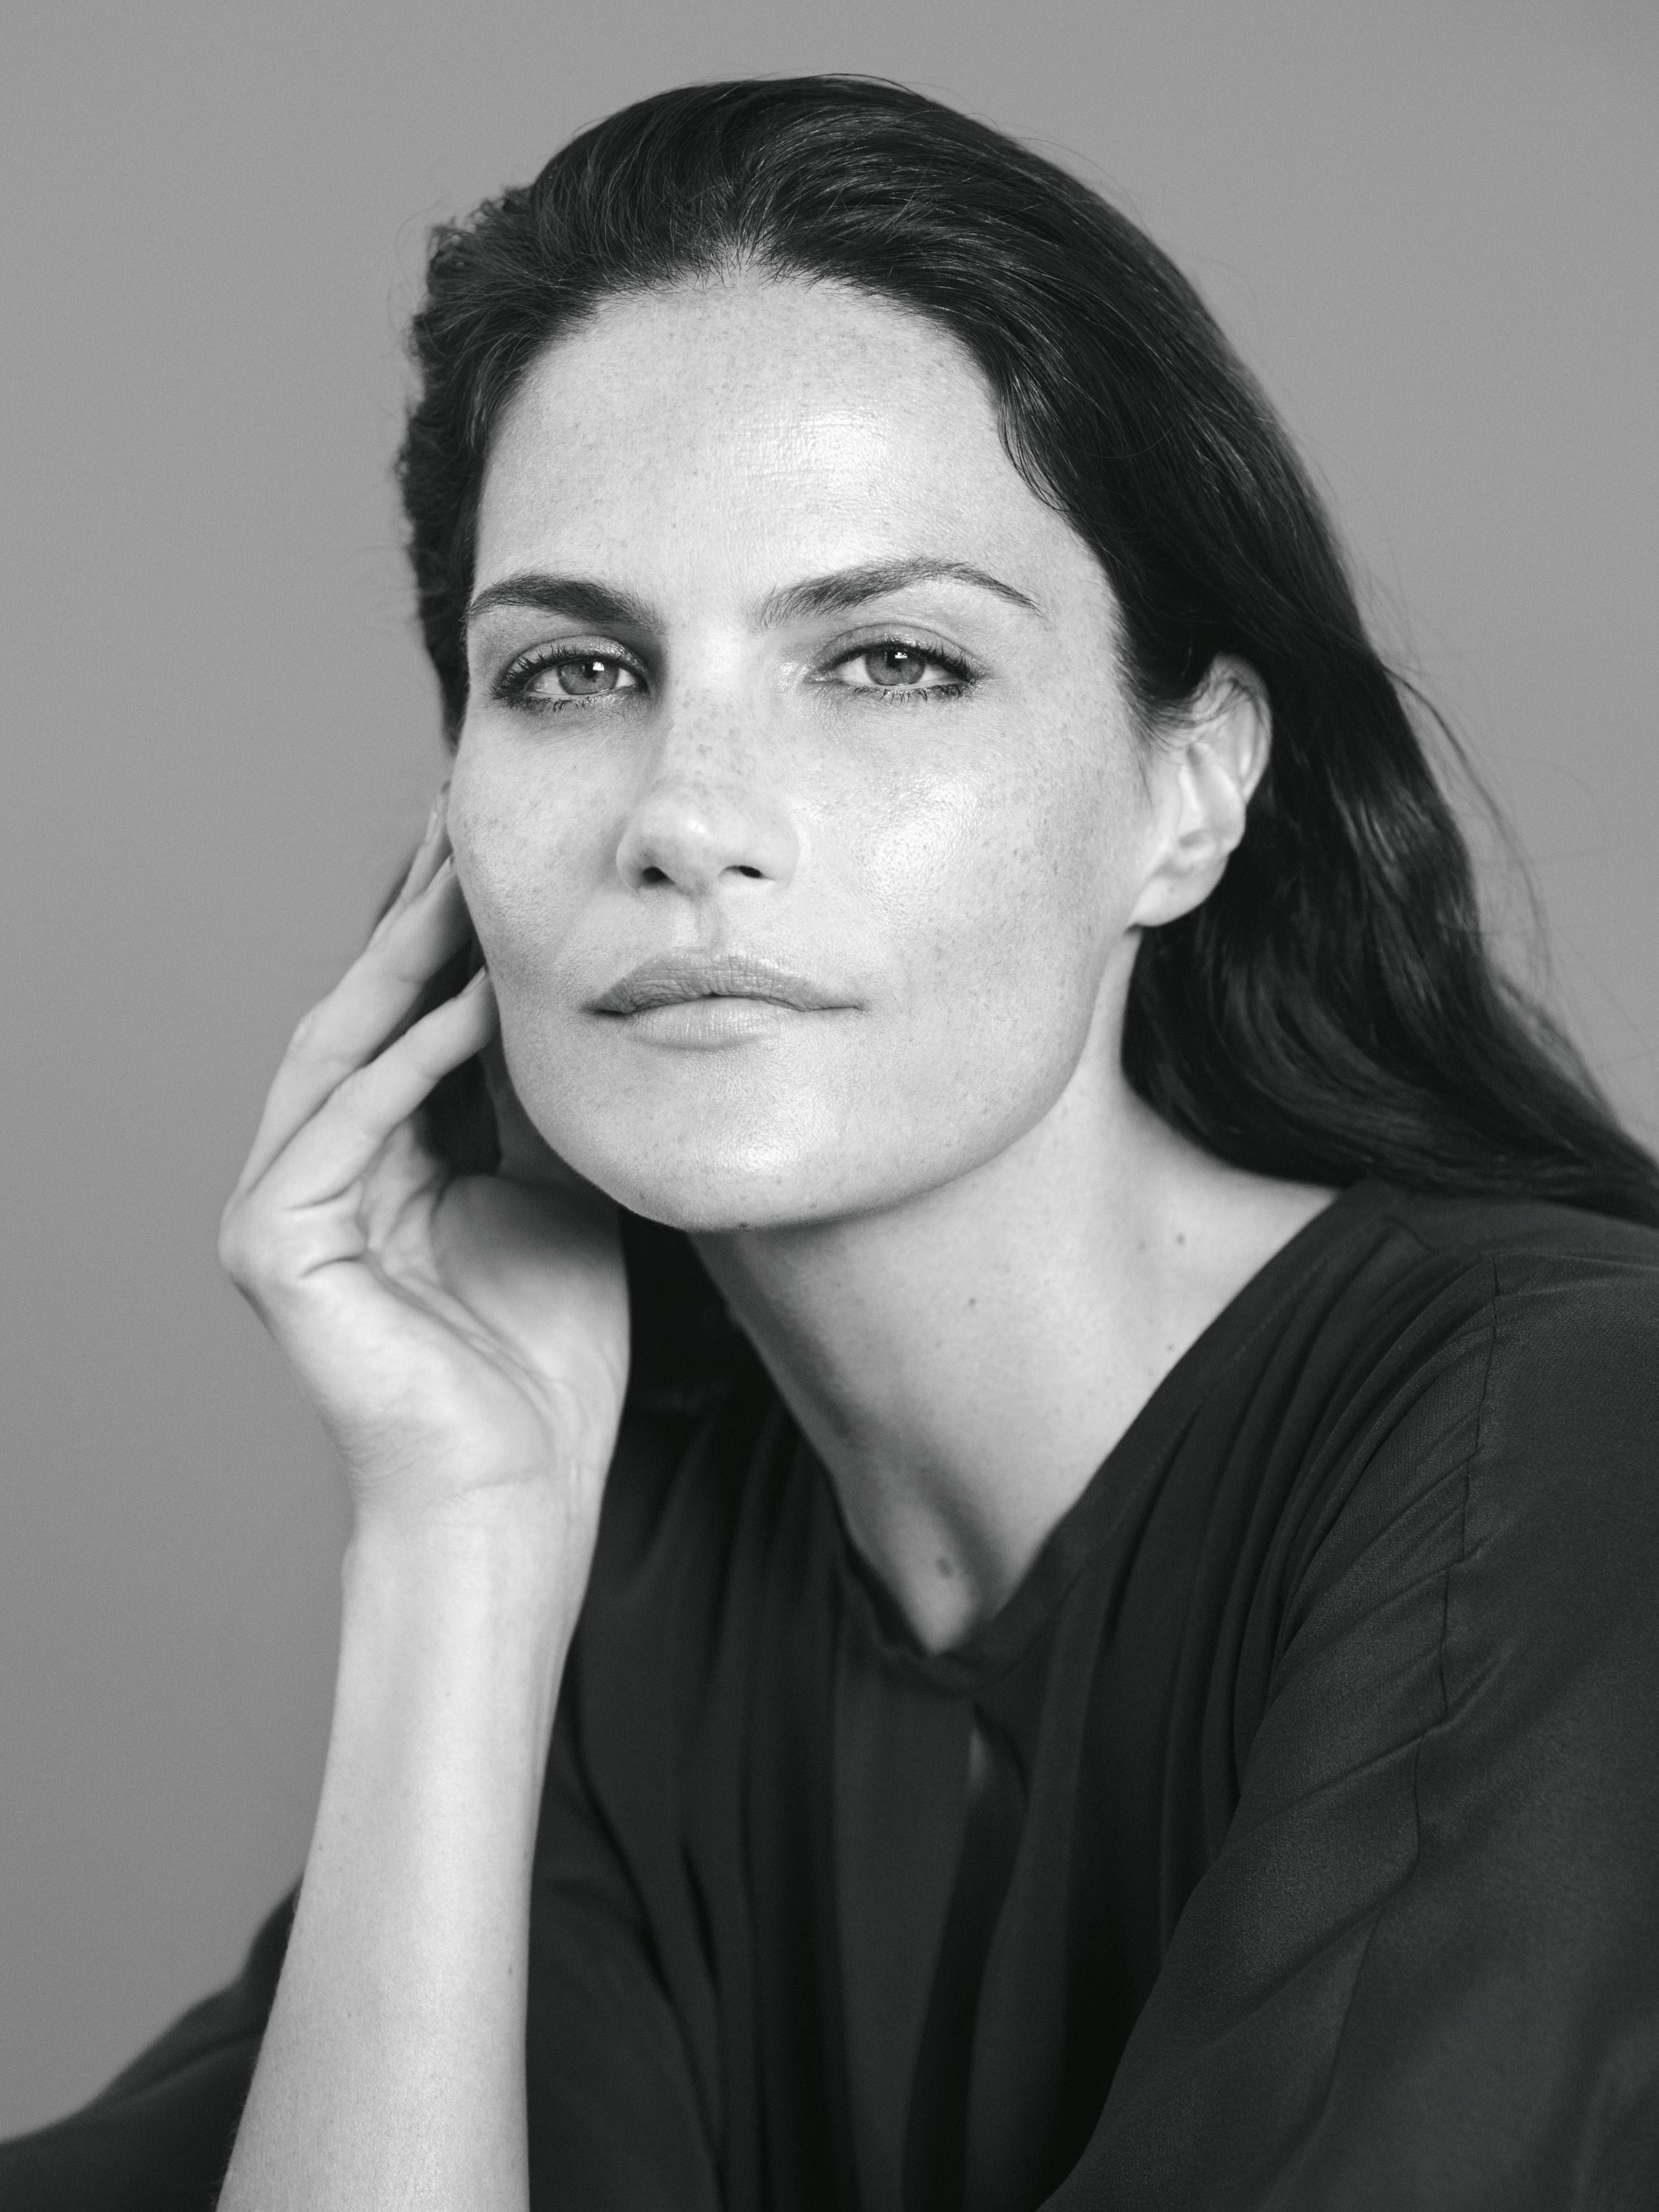 Missy Rayder is the new face for Seventy